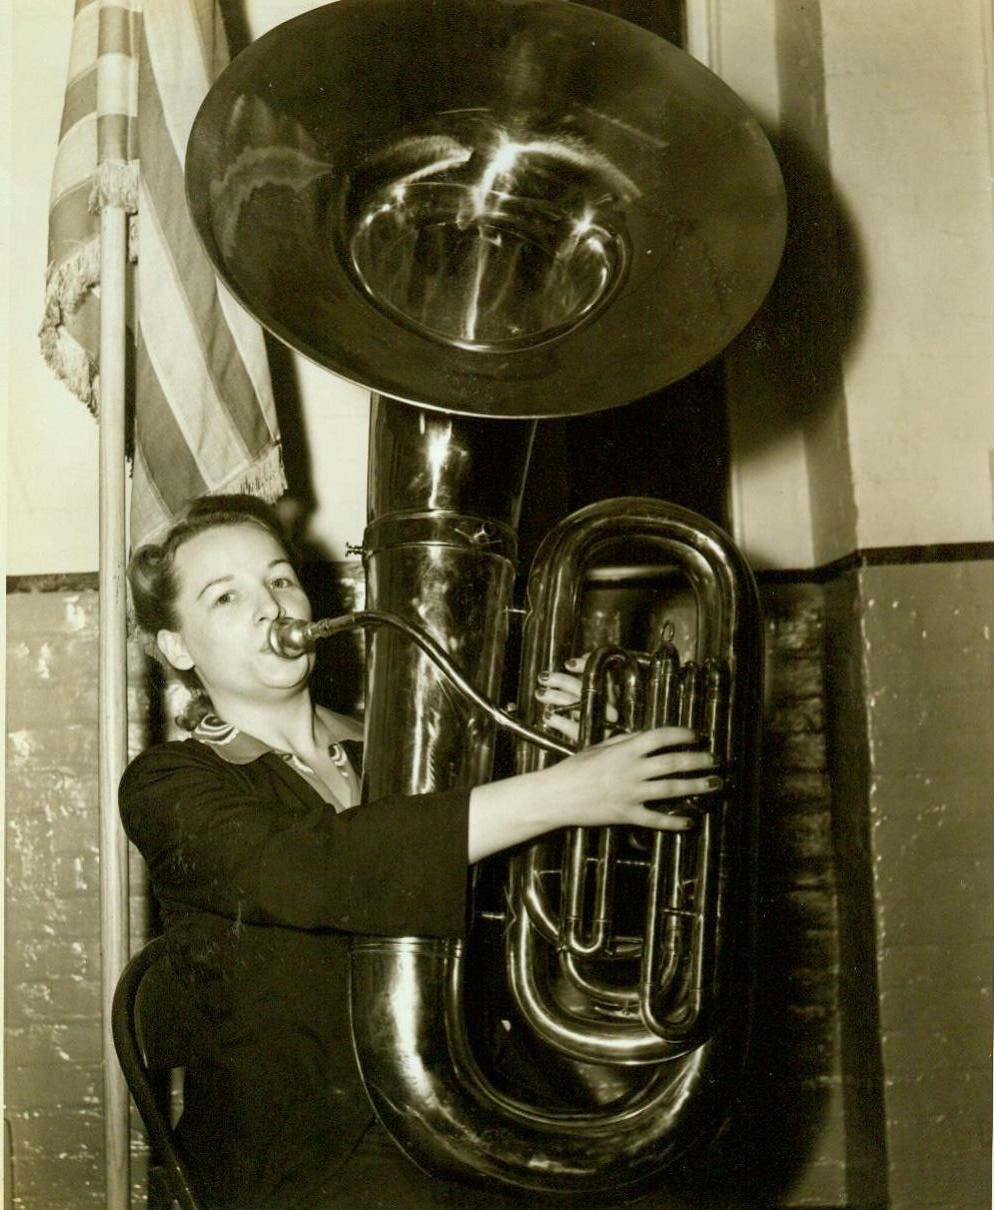 SWORN IN AS W.A.A.C. BAND MEMBER, 7/30/1942. NEW YORK, NY – Miss Janet Rose Montgomery, 29, blows a tune on her horn after being sworn in as one of the first members of the W.A.A.C. Military Band, at the Headquarters of the Southern New York Recruiting and Induction District, 39 Whitehall Street. Miss Montgomery who is from Detroit, Mich., has had considerable experience with bands in the Middle West. She will report to Ft. Des Moines, Iowa, August 3rd. Credit: ACME;